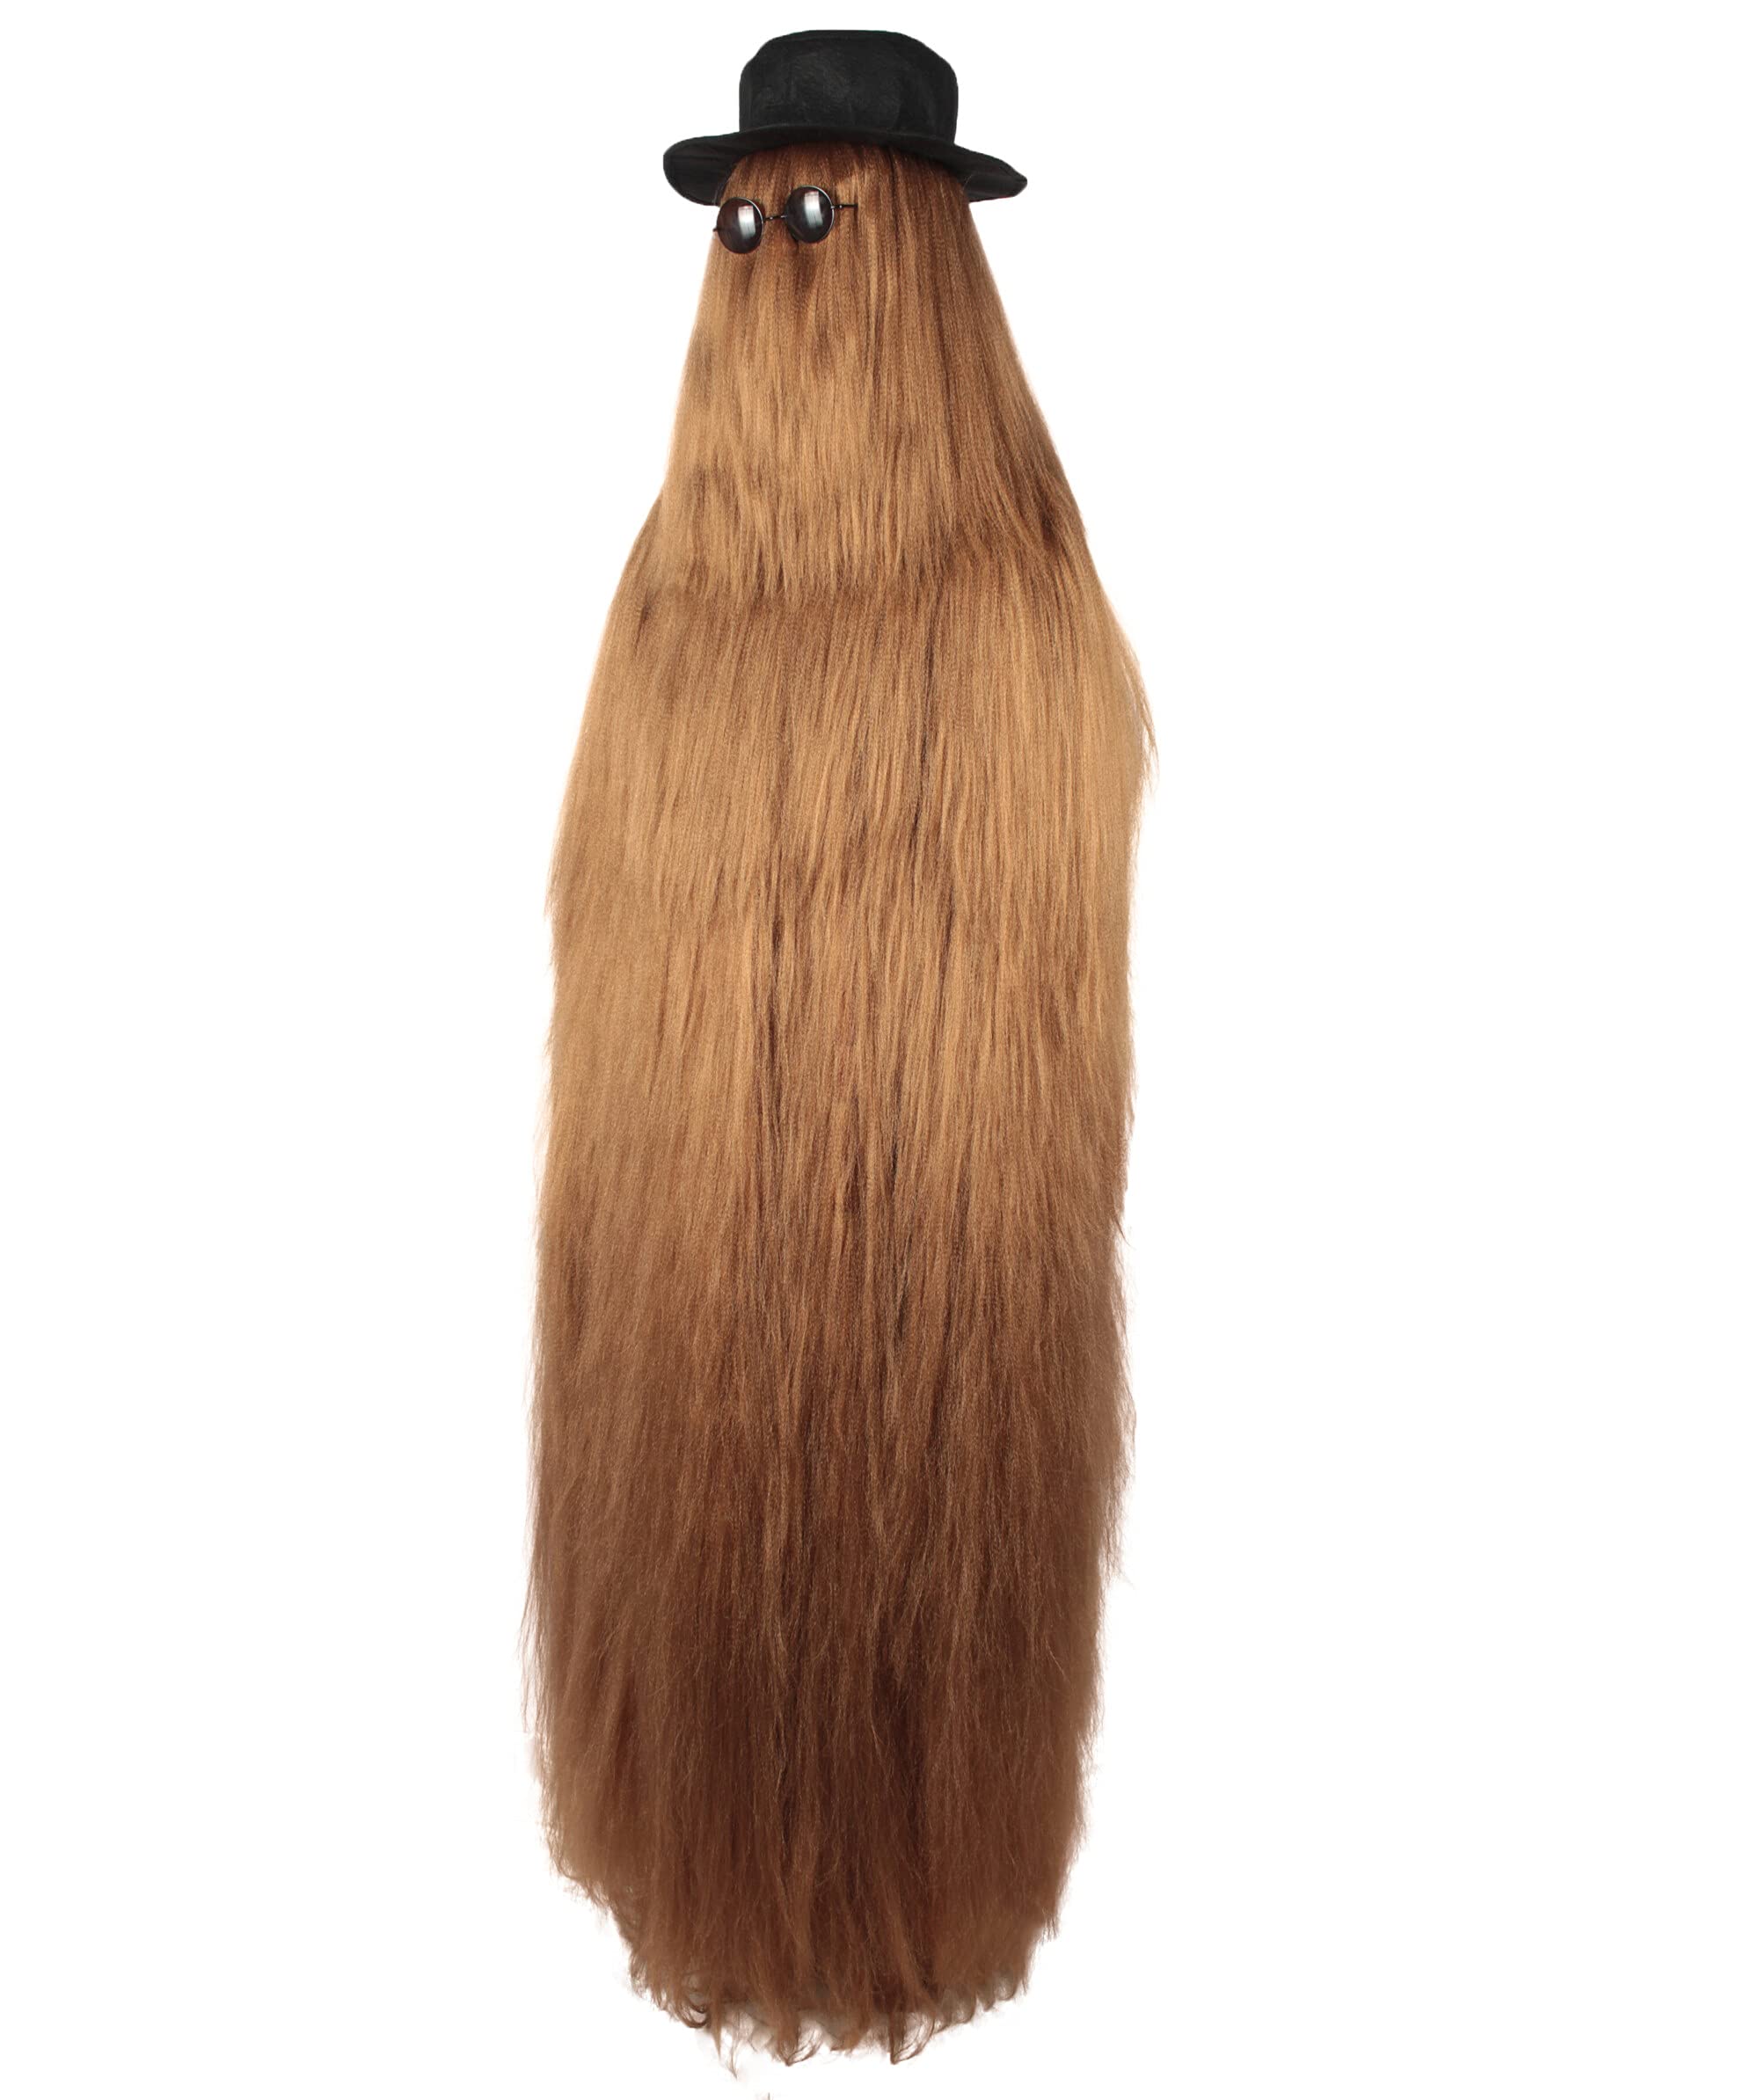 HPO Adult Unisex Cousin Itt Addams Family Dapper Creature Monster Halloween Costume, Synthetic Fiber, Brown - image 5 of 9